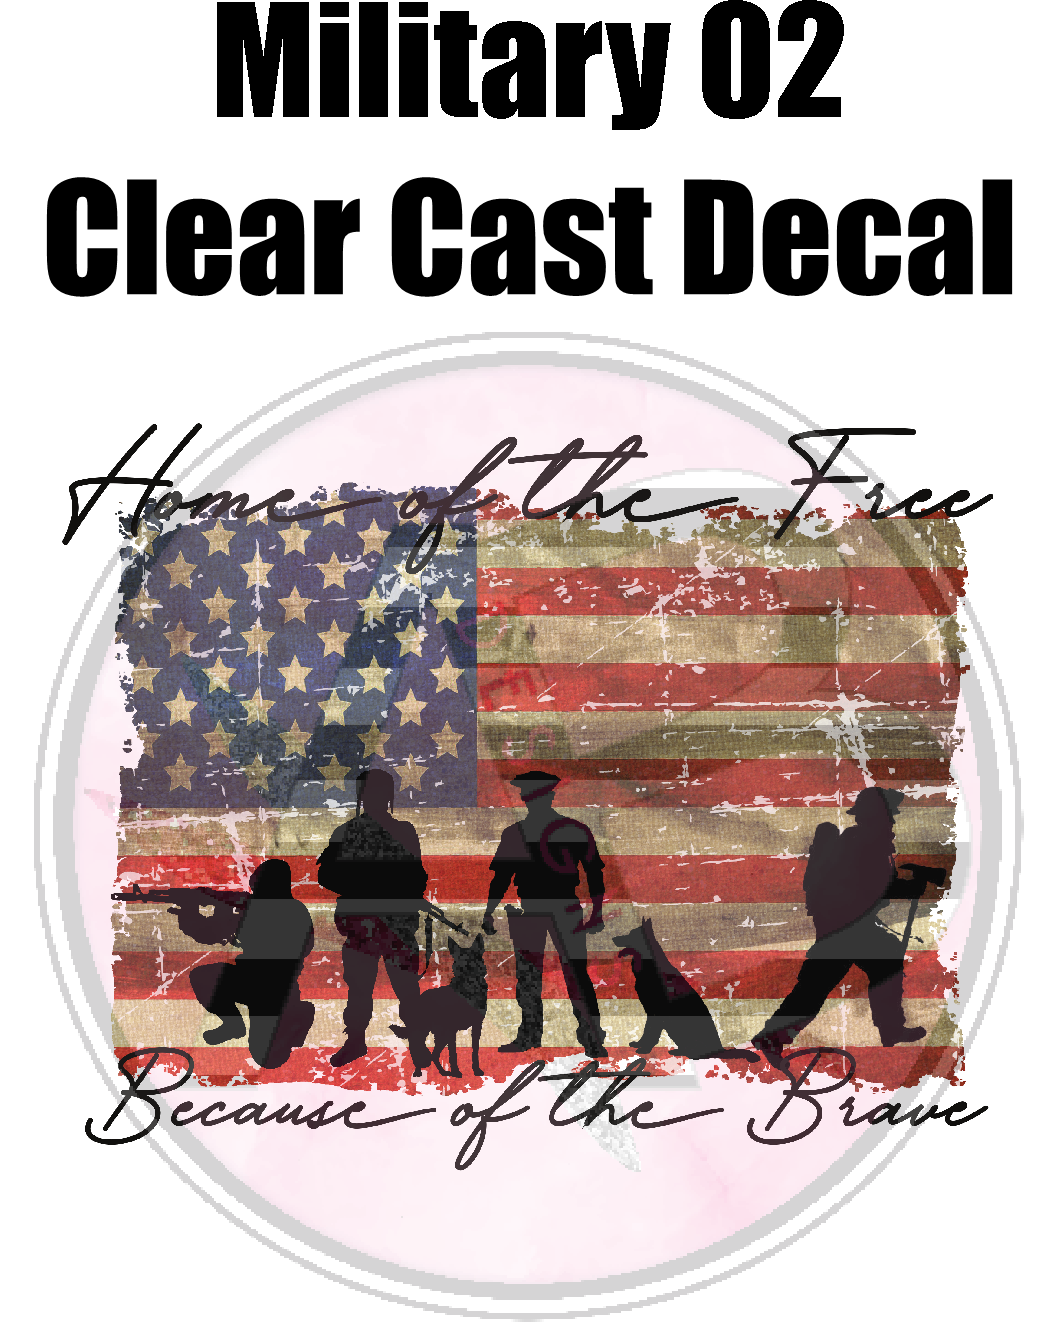 Military 02 - Clear Cast Decal